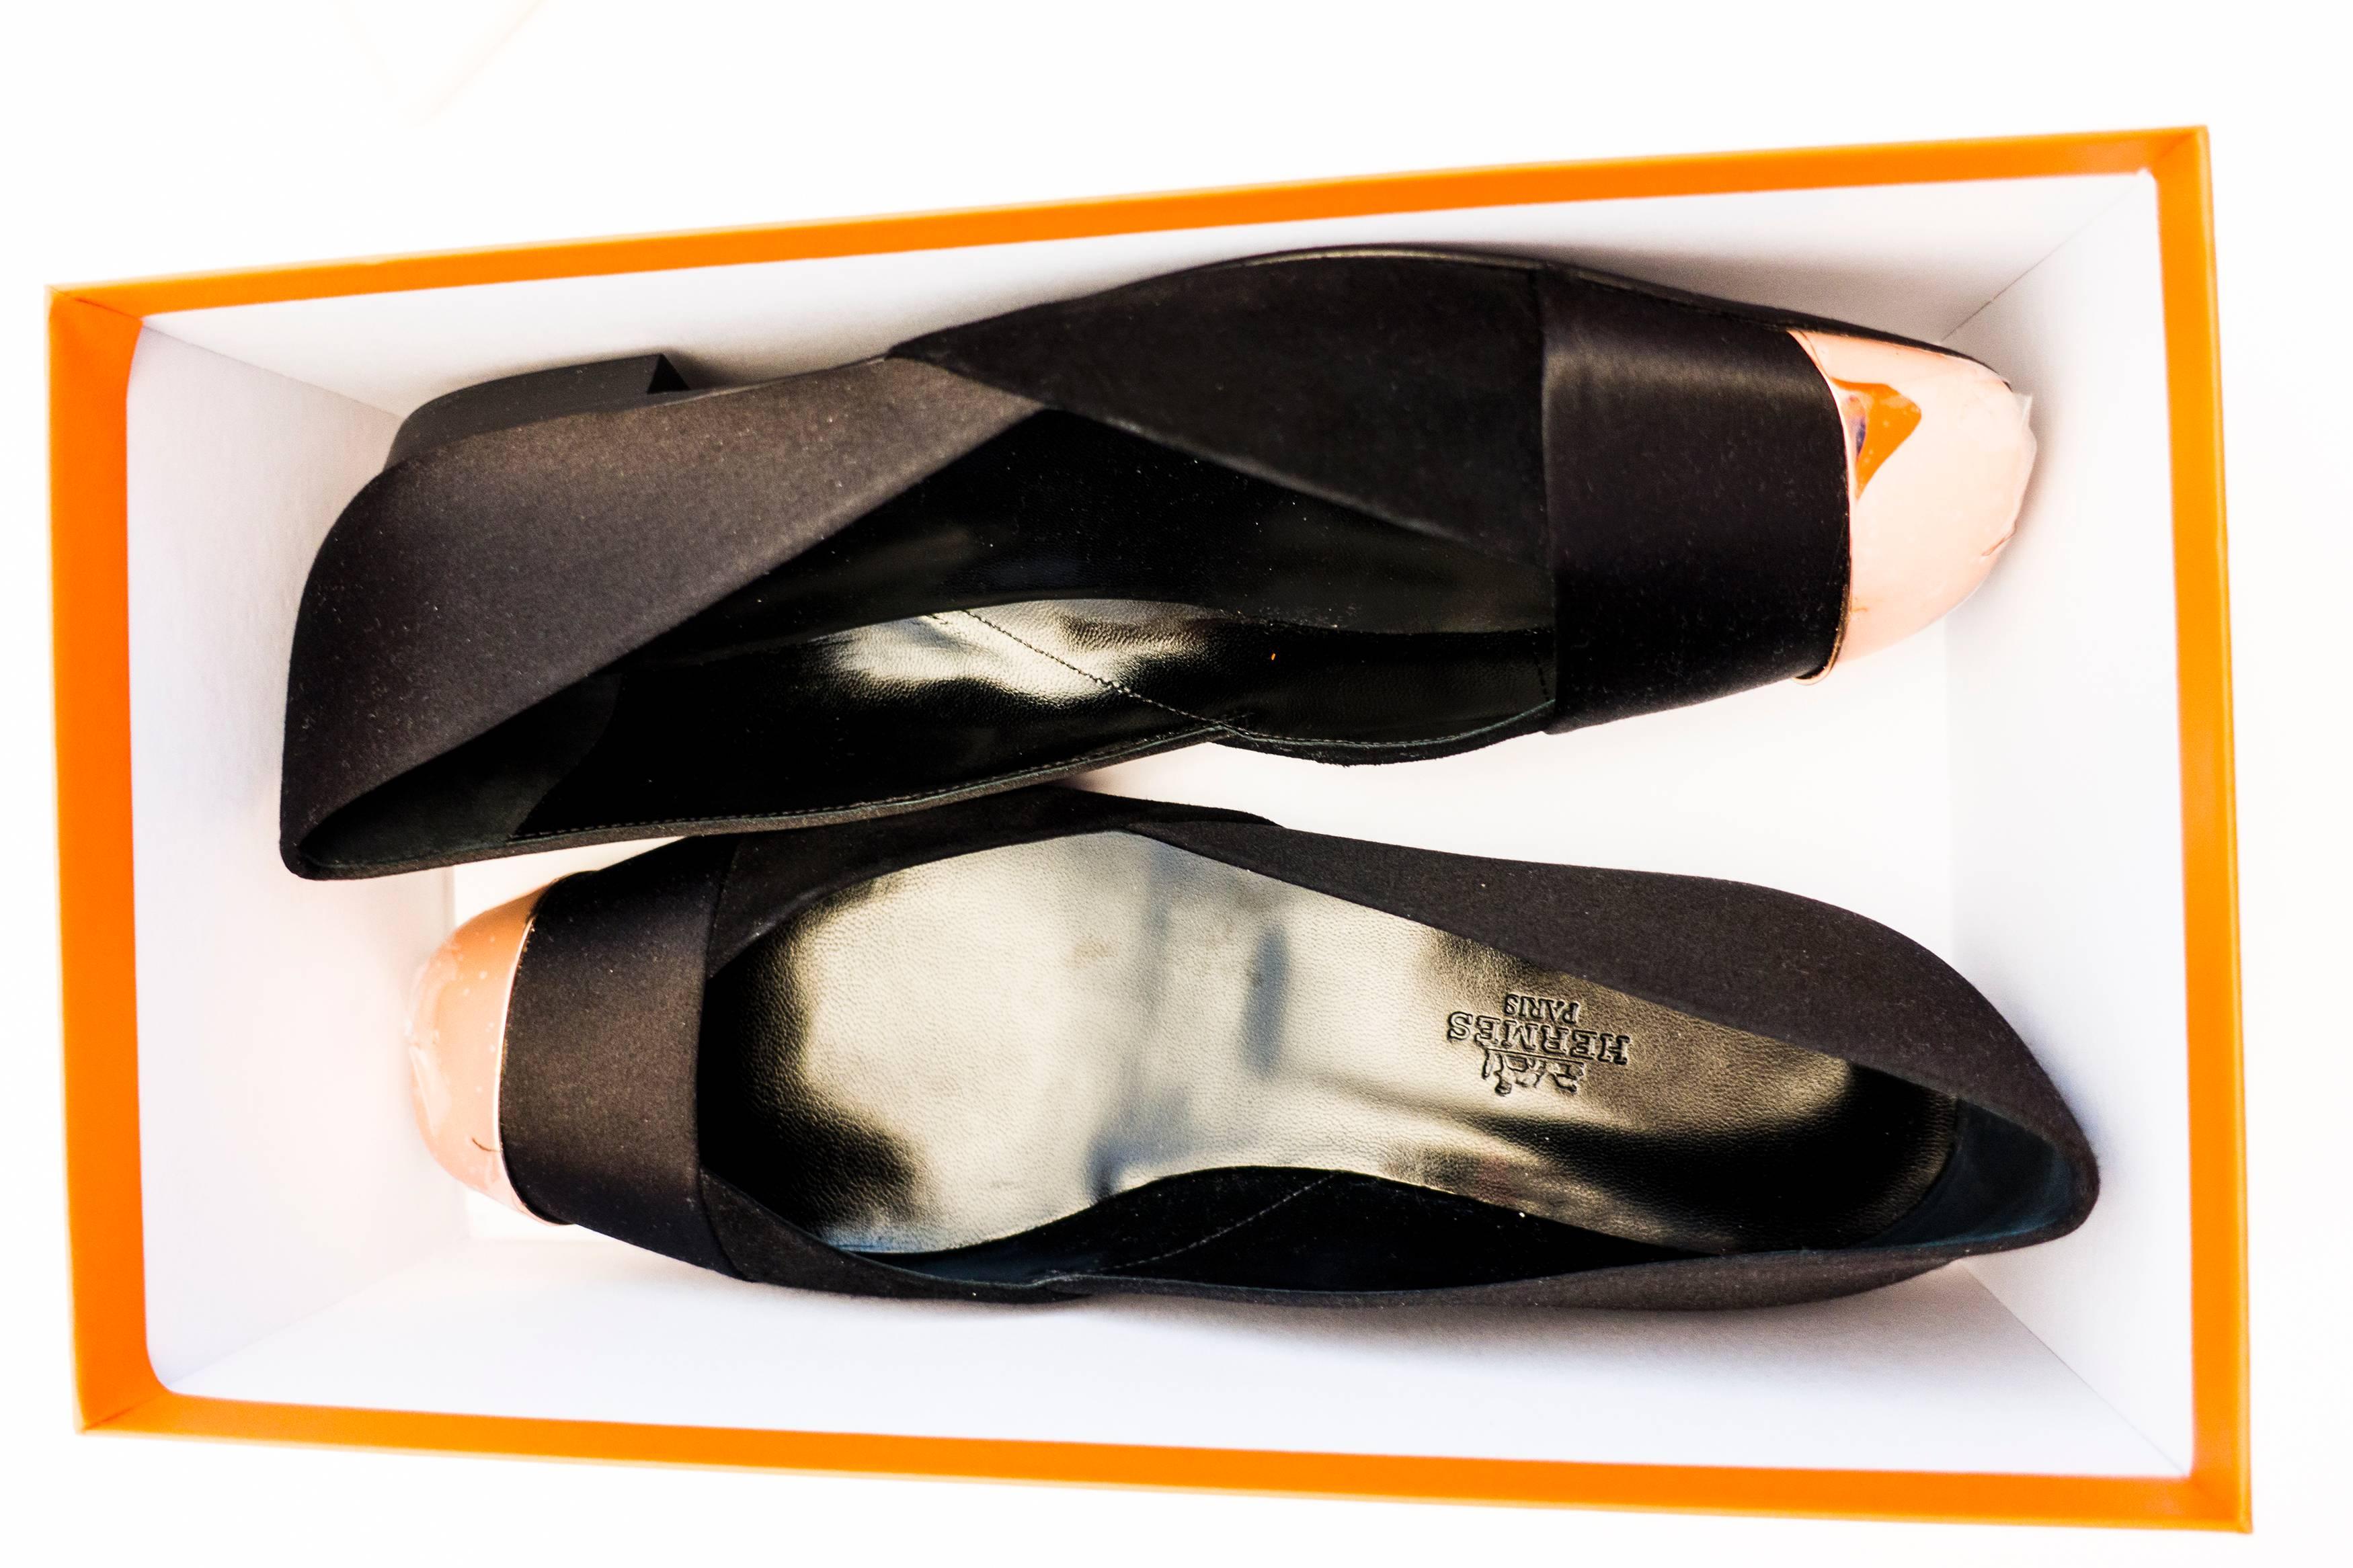 Store fresh.  Pristine condition.
Comes with Hermes sleepers, signature orange box, and ribbon.
Below retail $1012 including tax where we are.
Latest Hermes ladies' ballerina flat
Features satin and suede goatskin, rose gold plated cap, leather